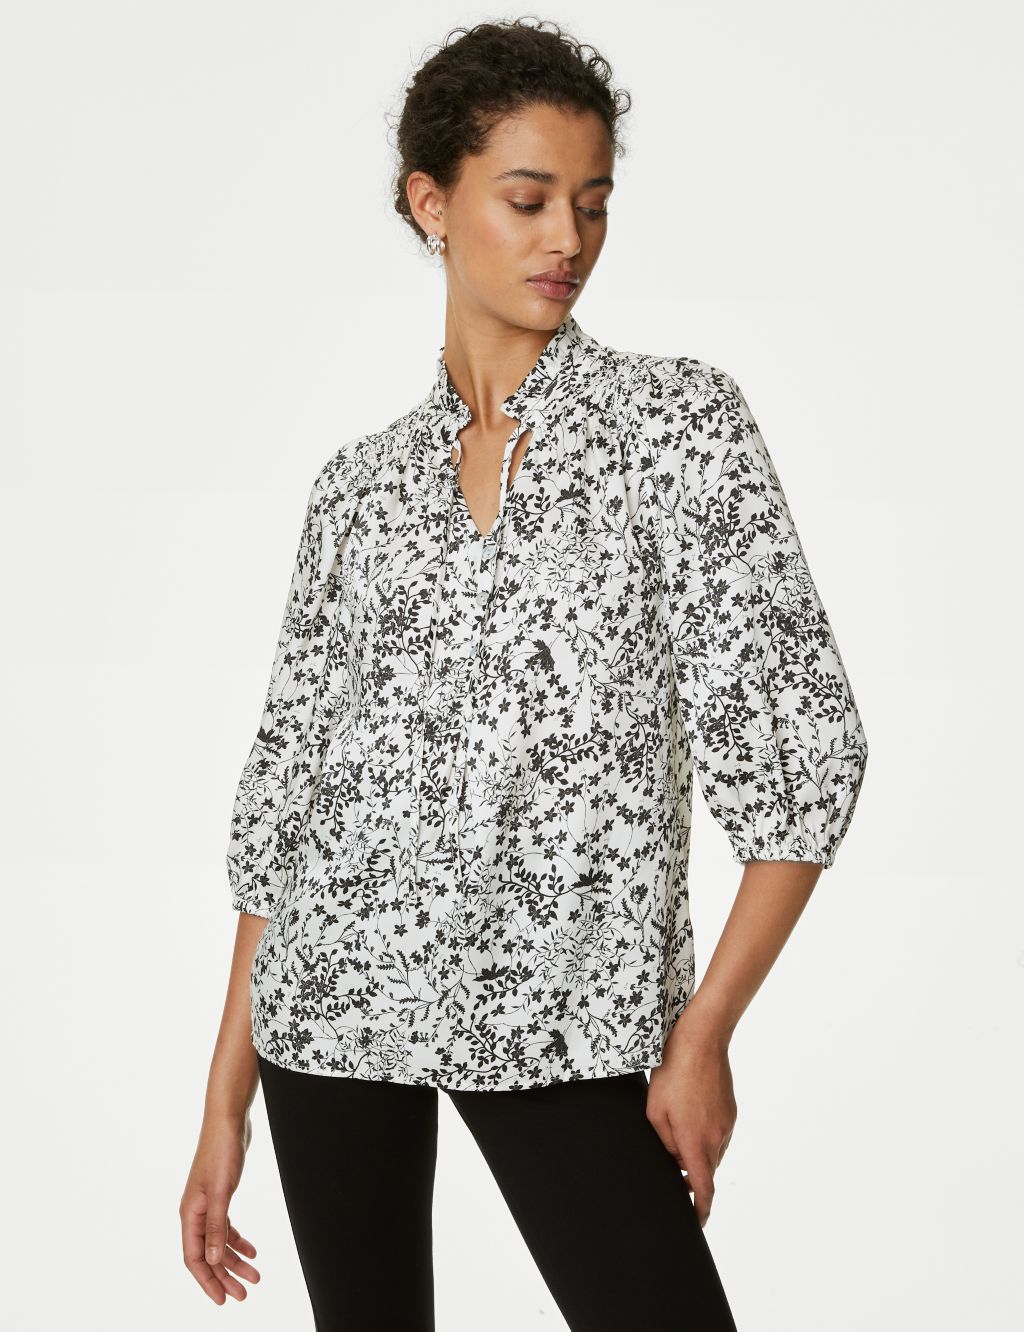 Printed Frill Neck Tie Front Popover Blouse image 4